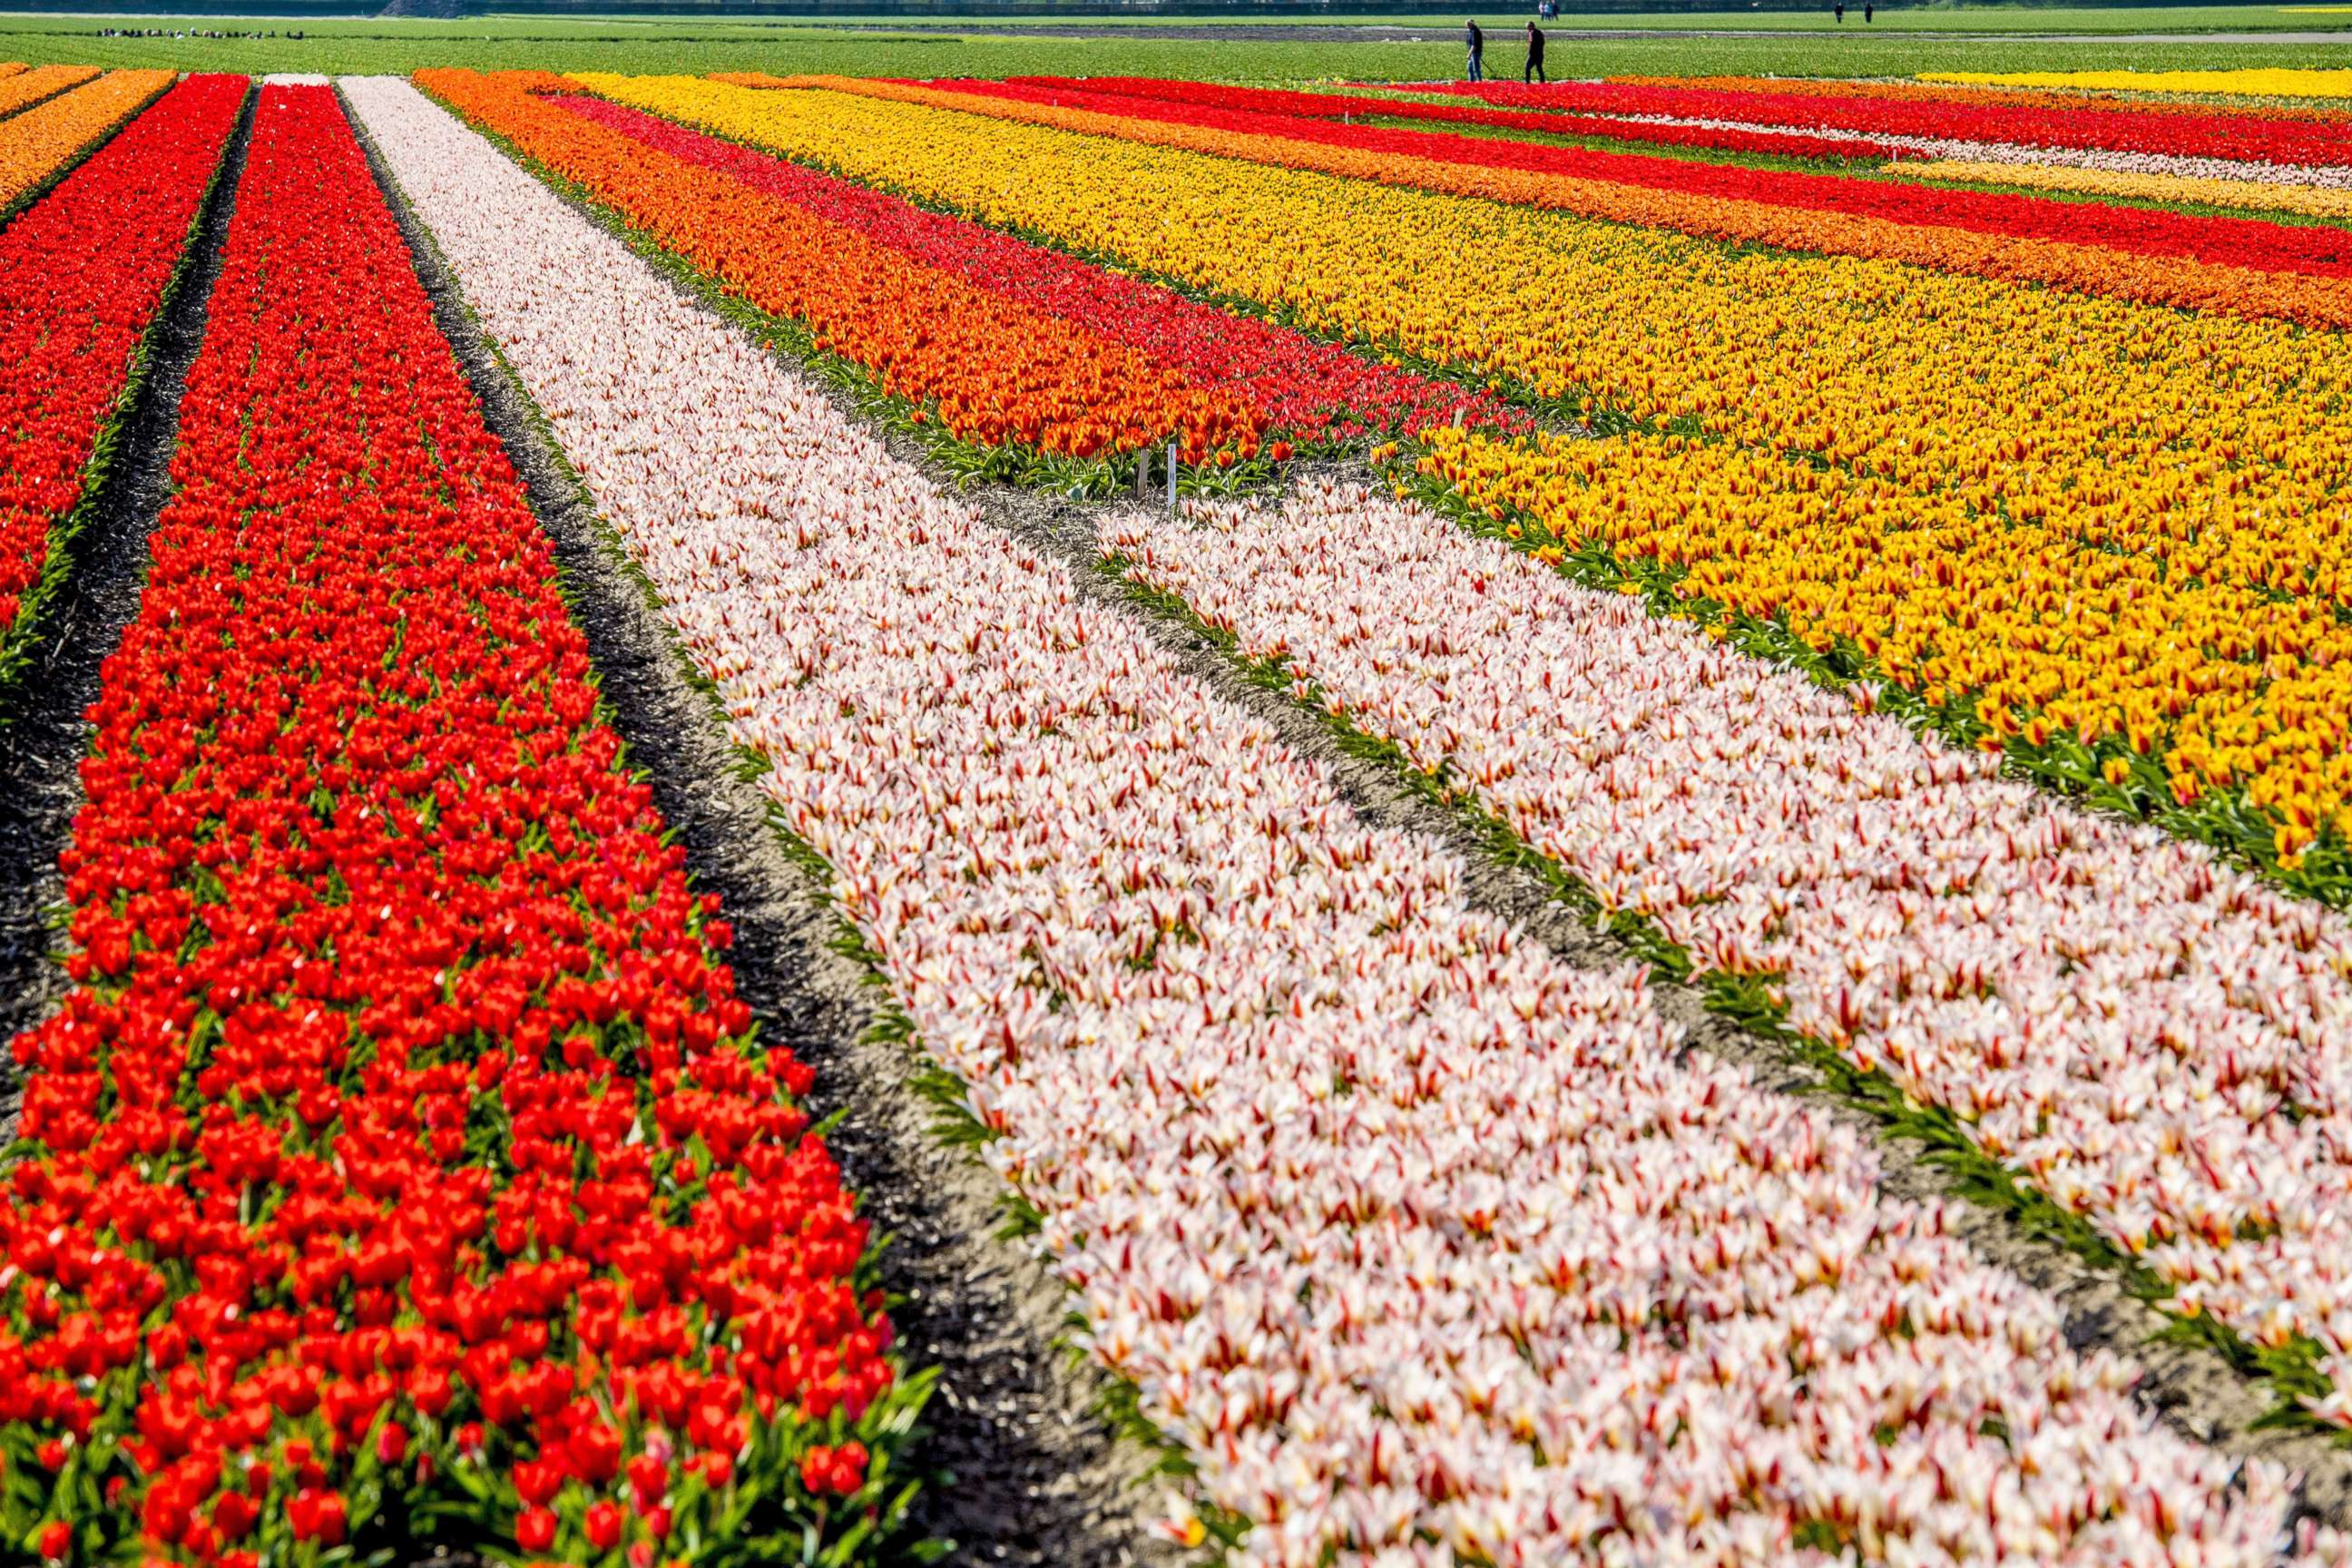 PHOTO: Visitors to the Keukenhof view the colorful flower fields and bulb blossoms, in Lisse, The Netherlands, April 17, 2018.